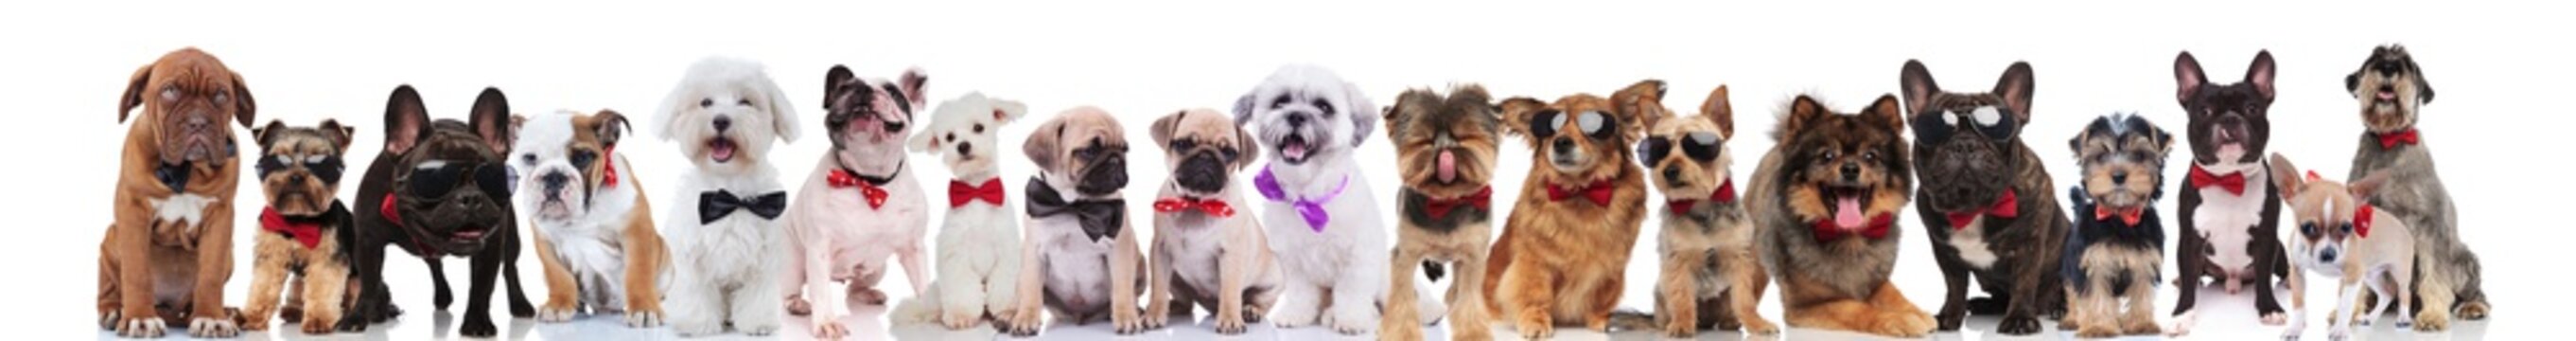 large group of gentleman dogs of different breeds wearing bowties